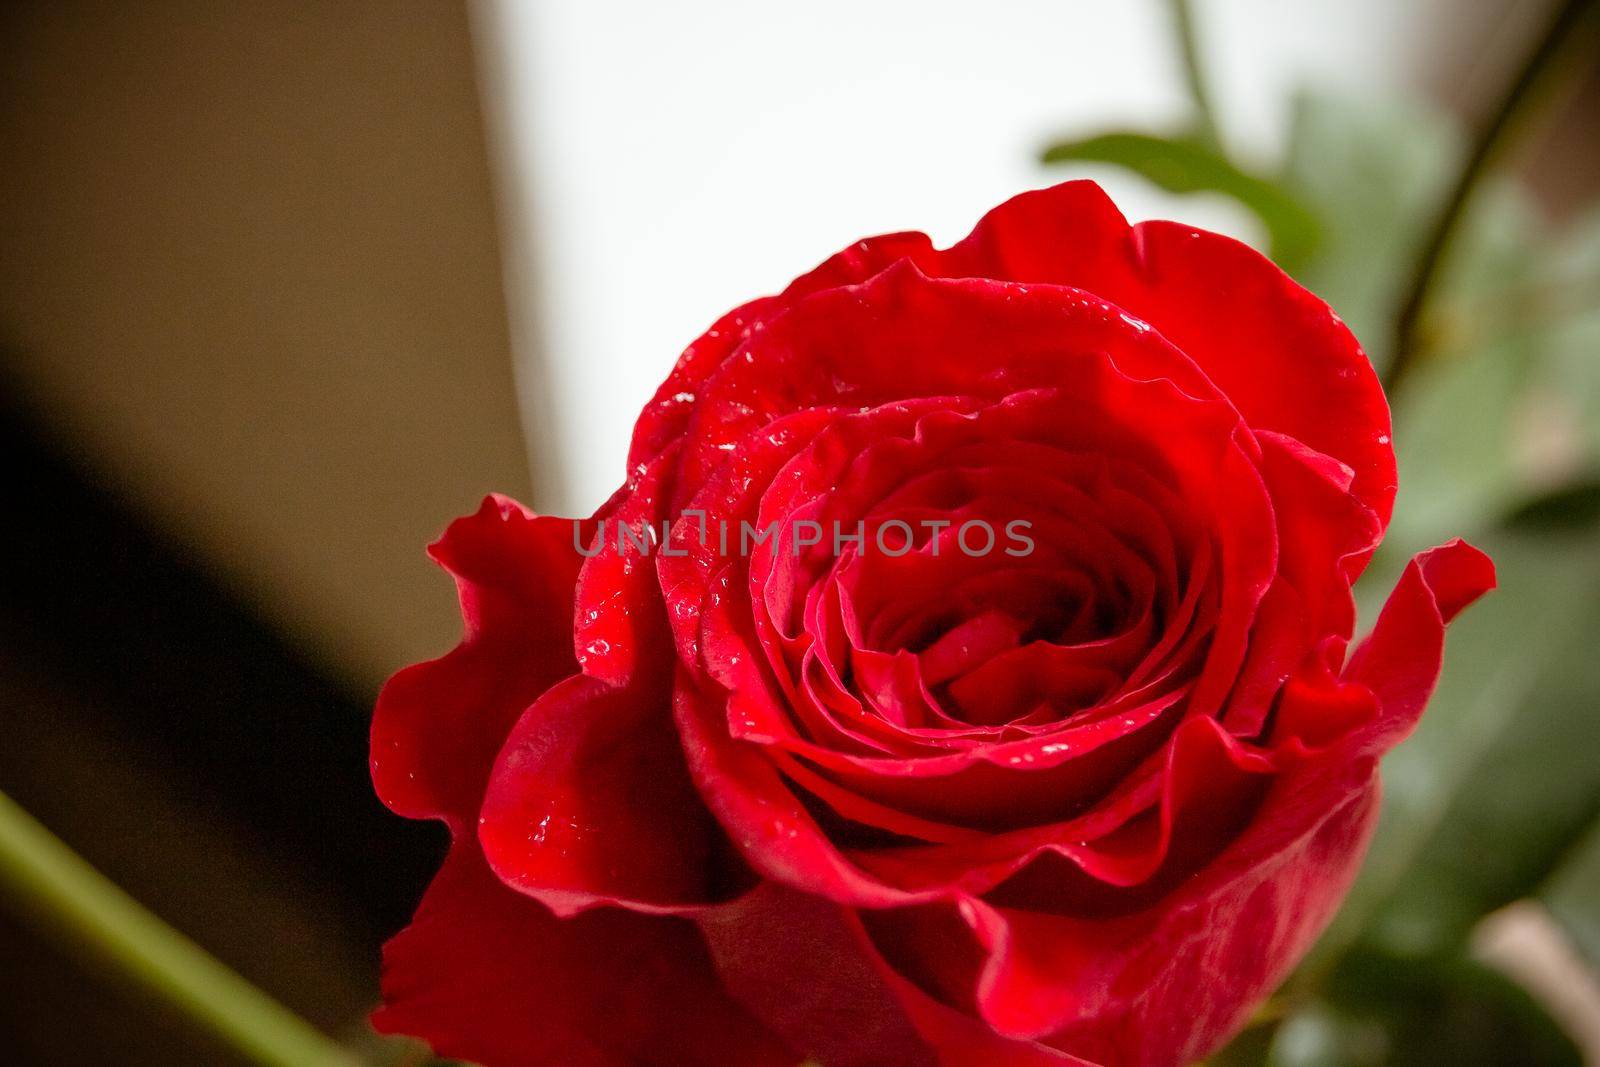 Single red rose water drops on white wooden background with copyspace, love romance wedding birthday concept